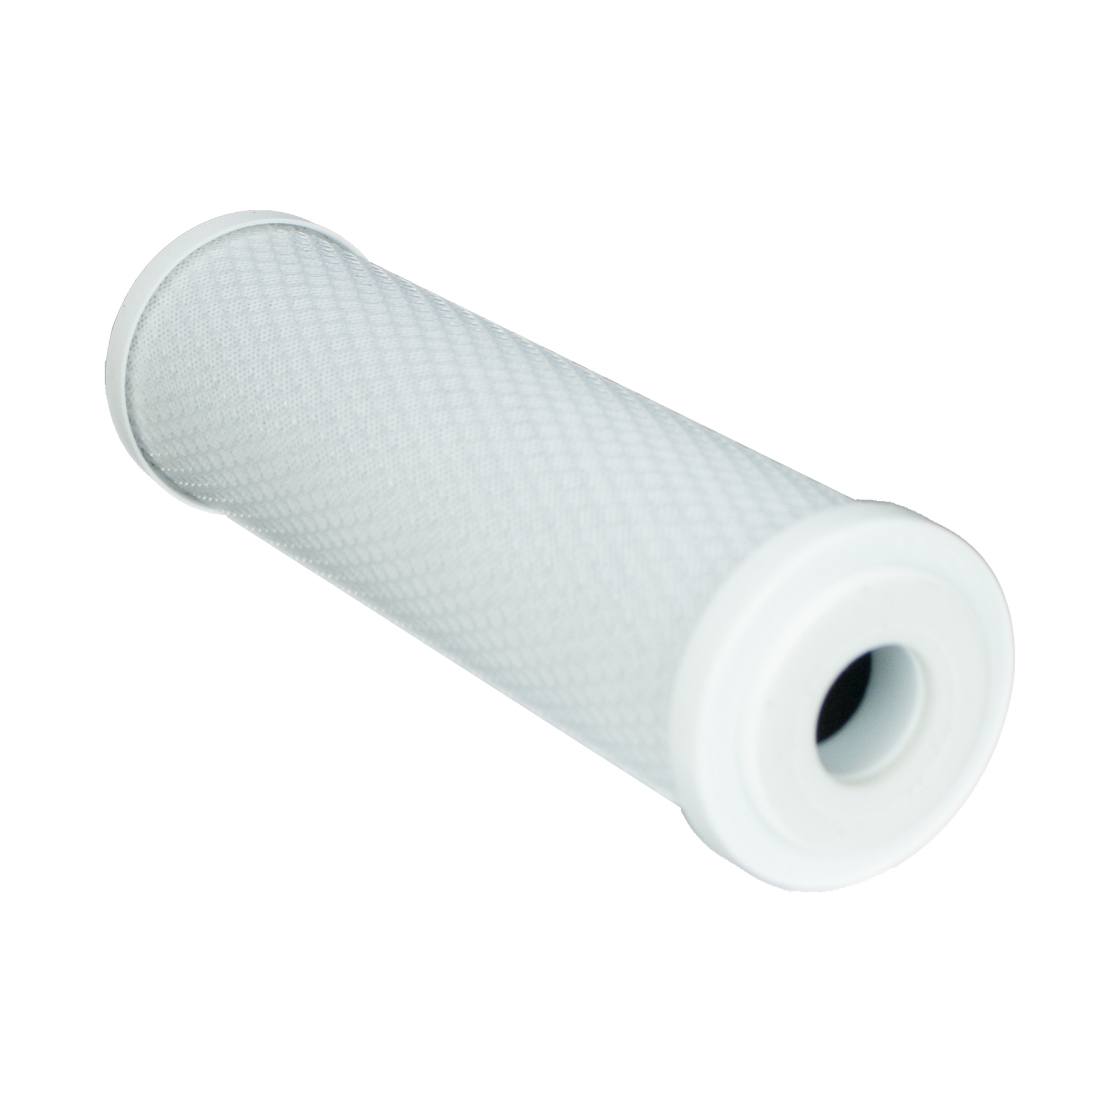 XERO Pure Carbon Filter - 10 Inch - Bottom View